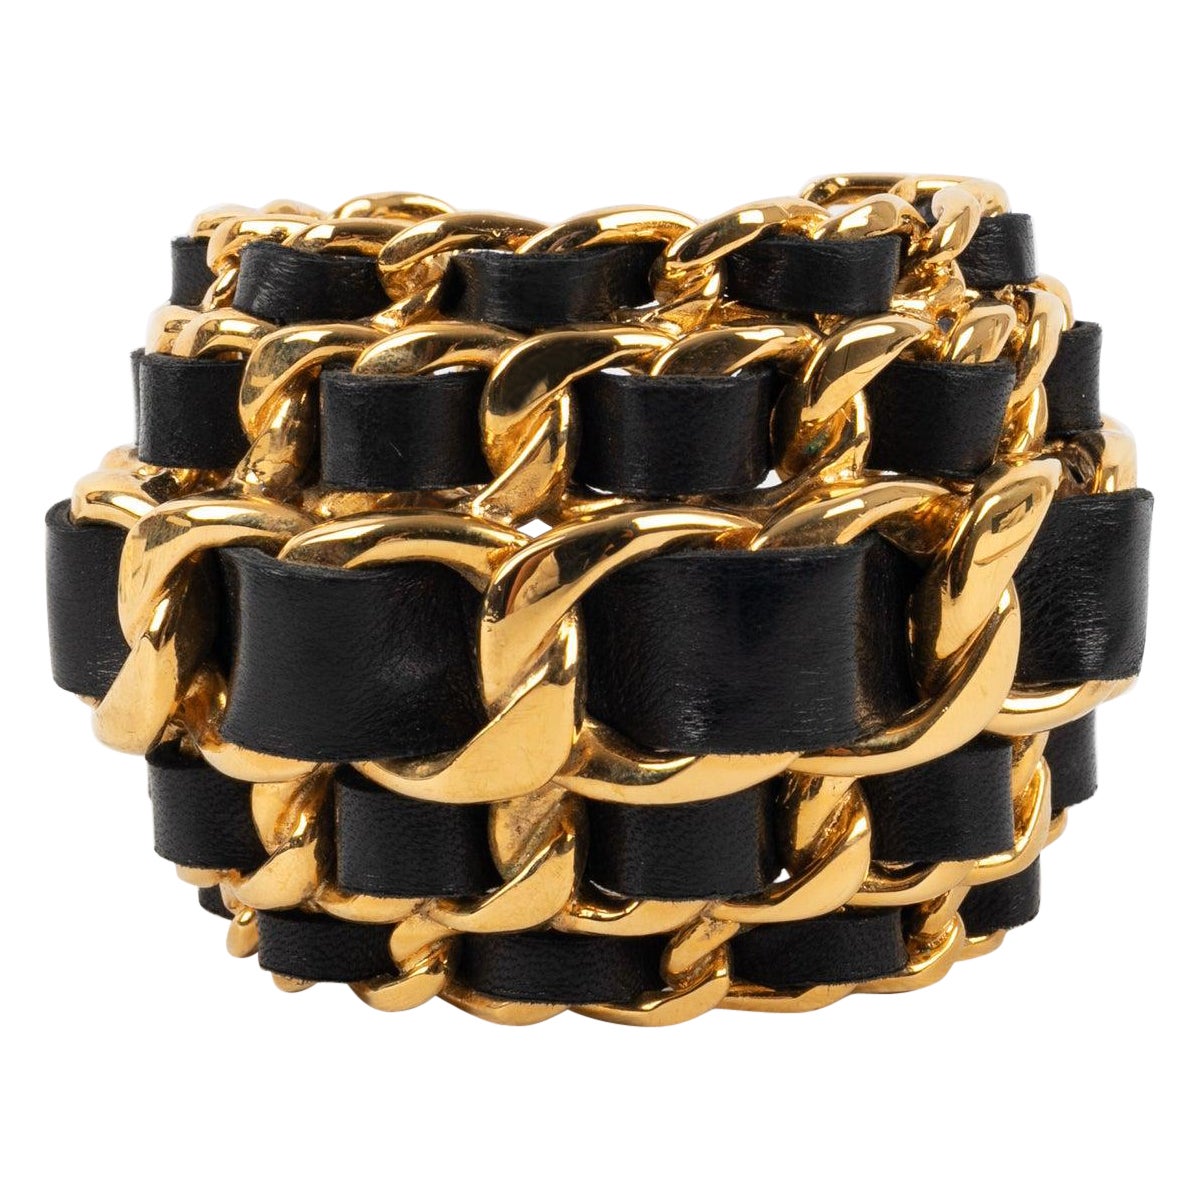 Chanel Golden Metal and Leather Cuff Bracelet with Chains, 1991